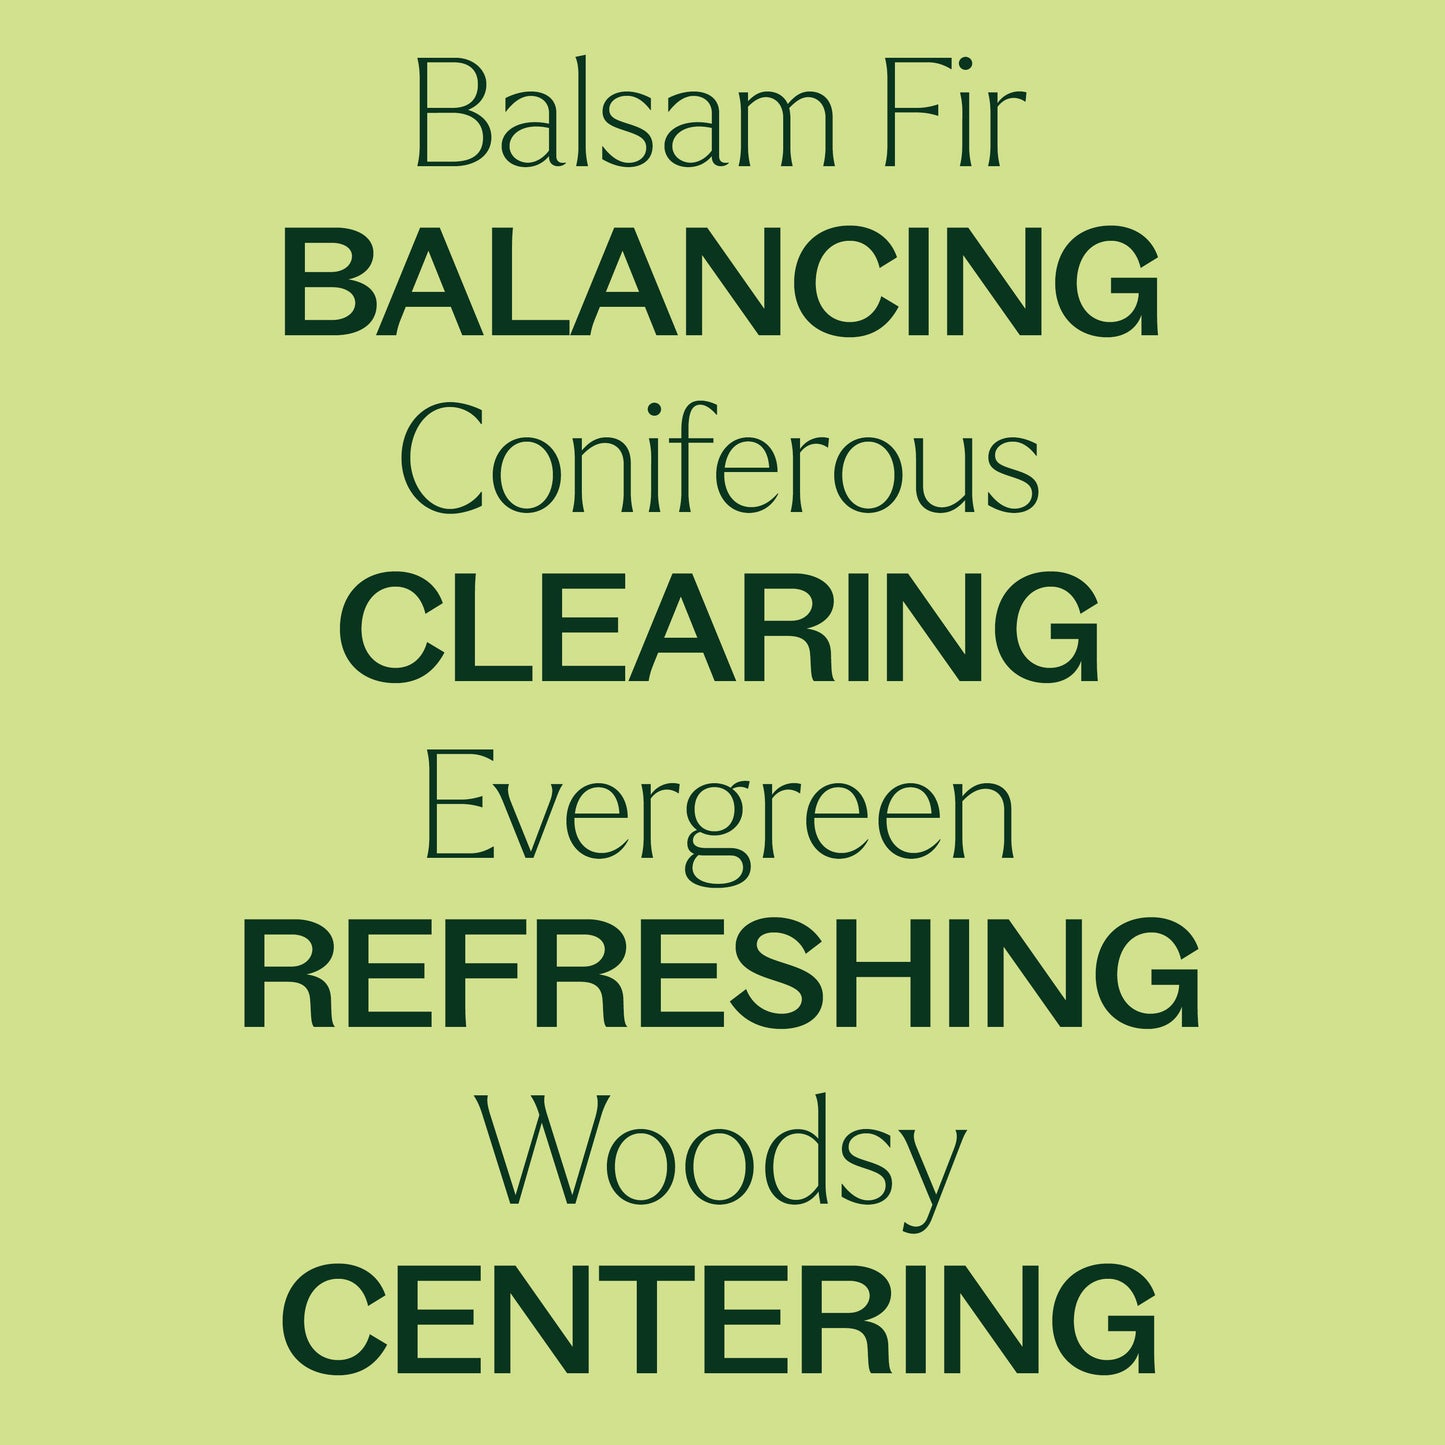 Key features of Balsam Fir Essential Oil. Balancing, coniferous, clearing, evergreen, refreshing, woodsy, and centering